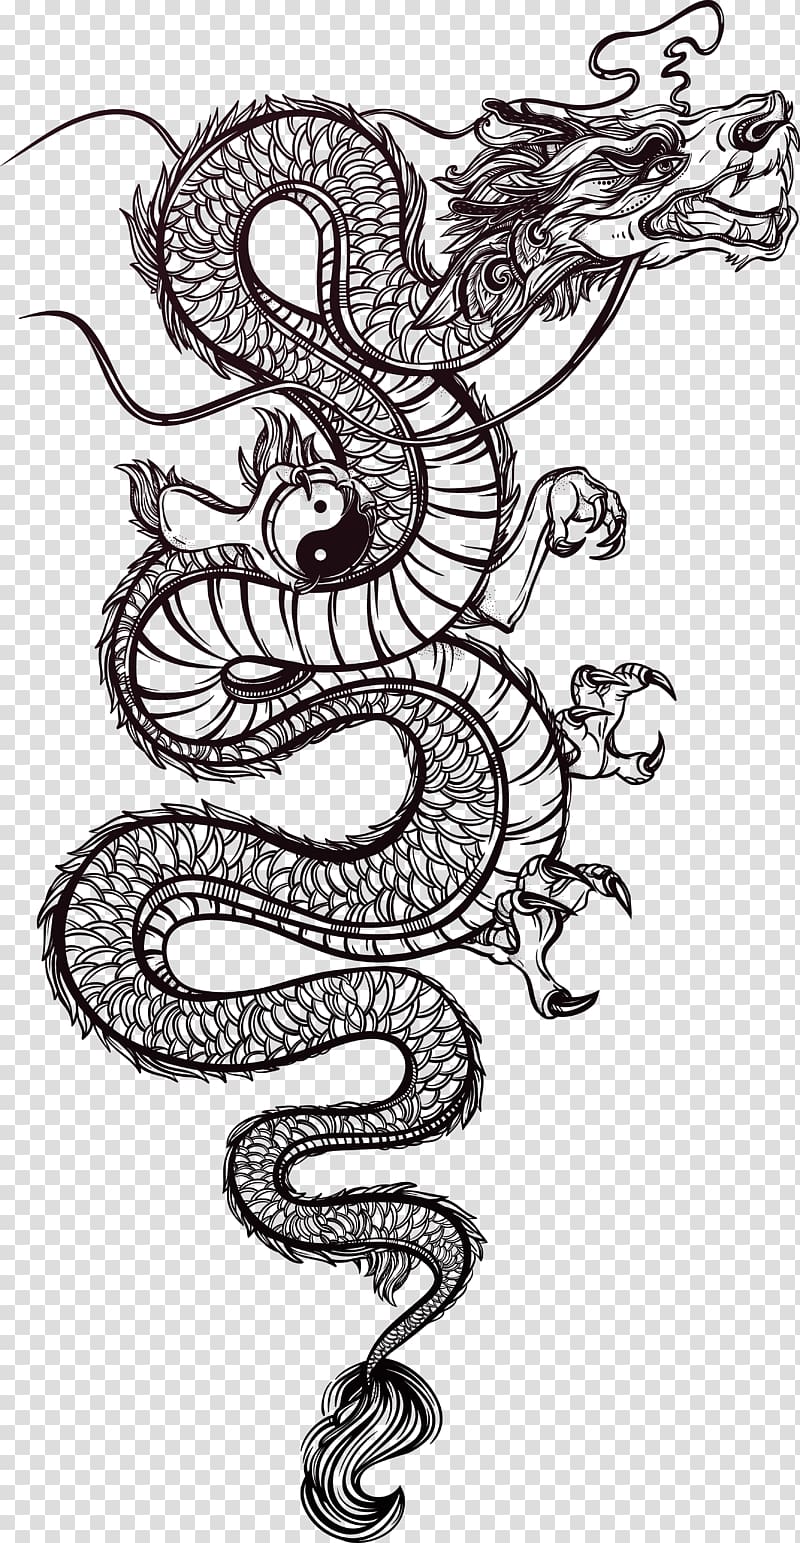 black dragon artwork, Chinese dragon Tattoo Illustration, Hand-painted dragon transparent background PNG clipart